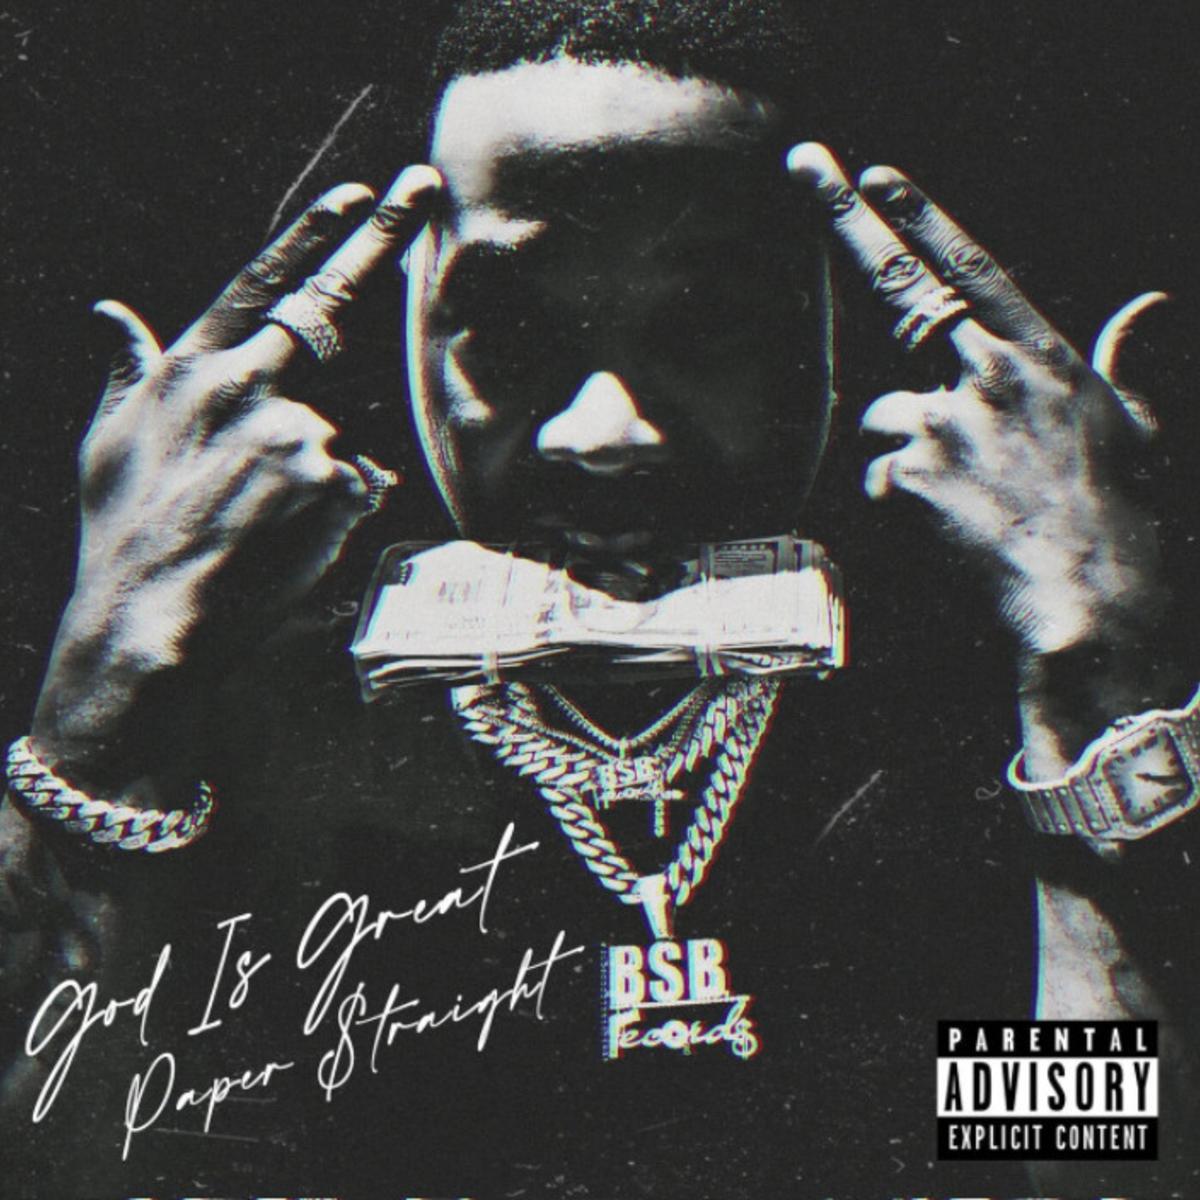 DOWNLOAD MP3: Troy Ave - The Crotana Park Story Pt. 1